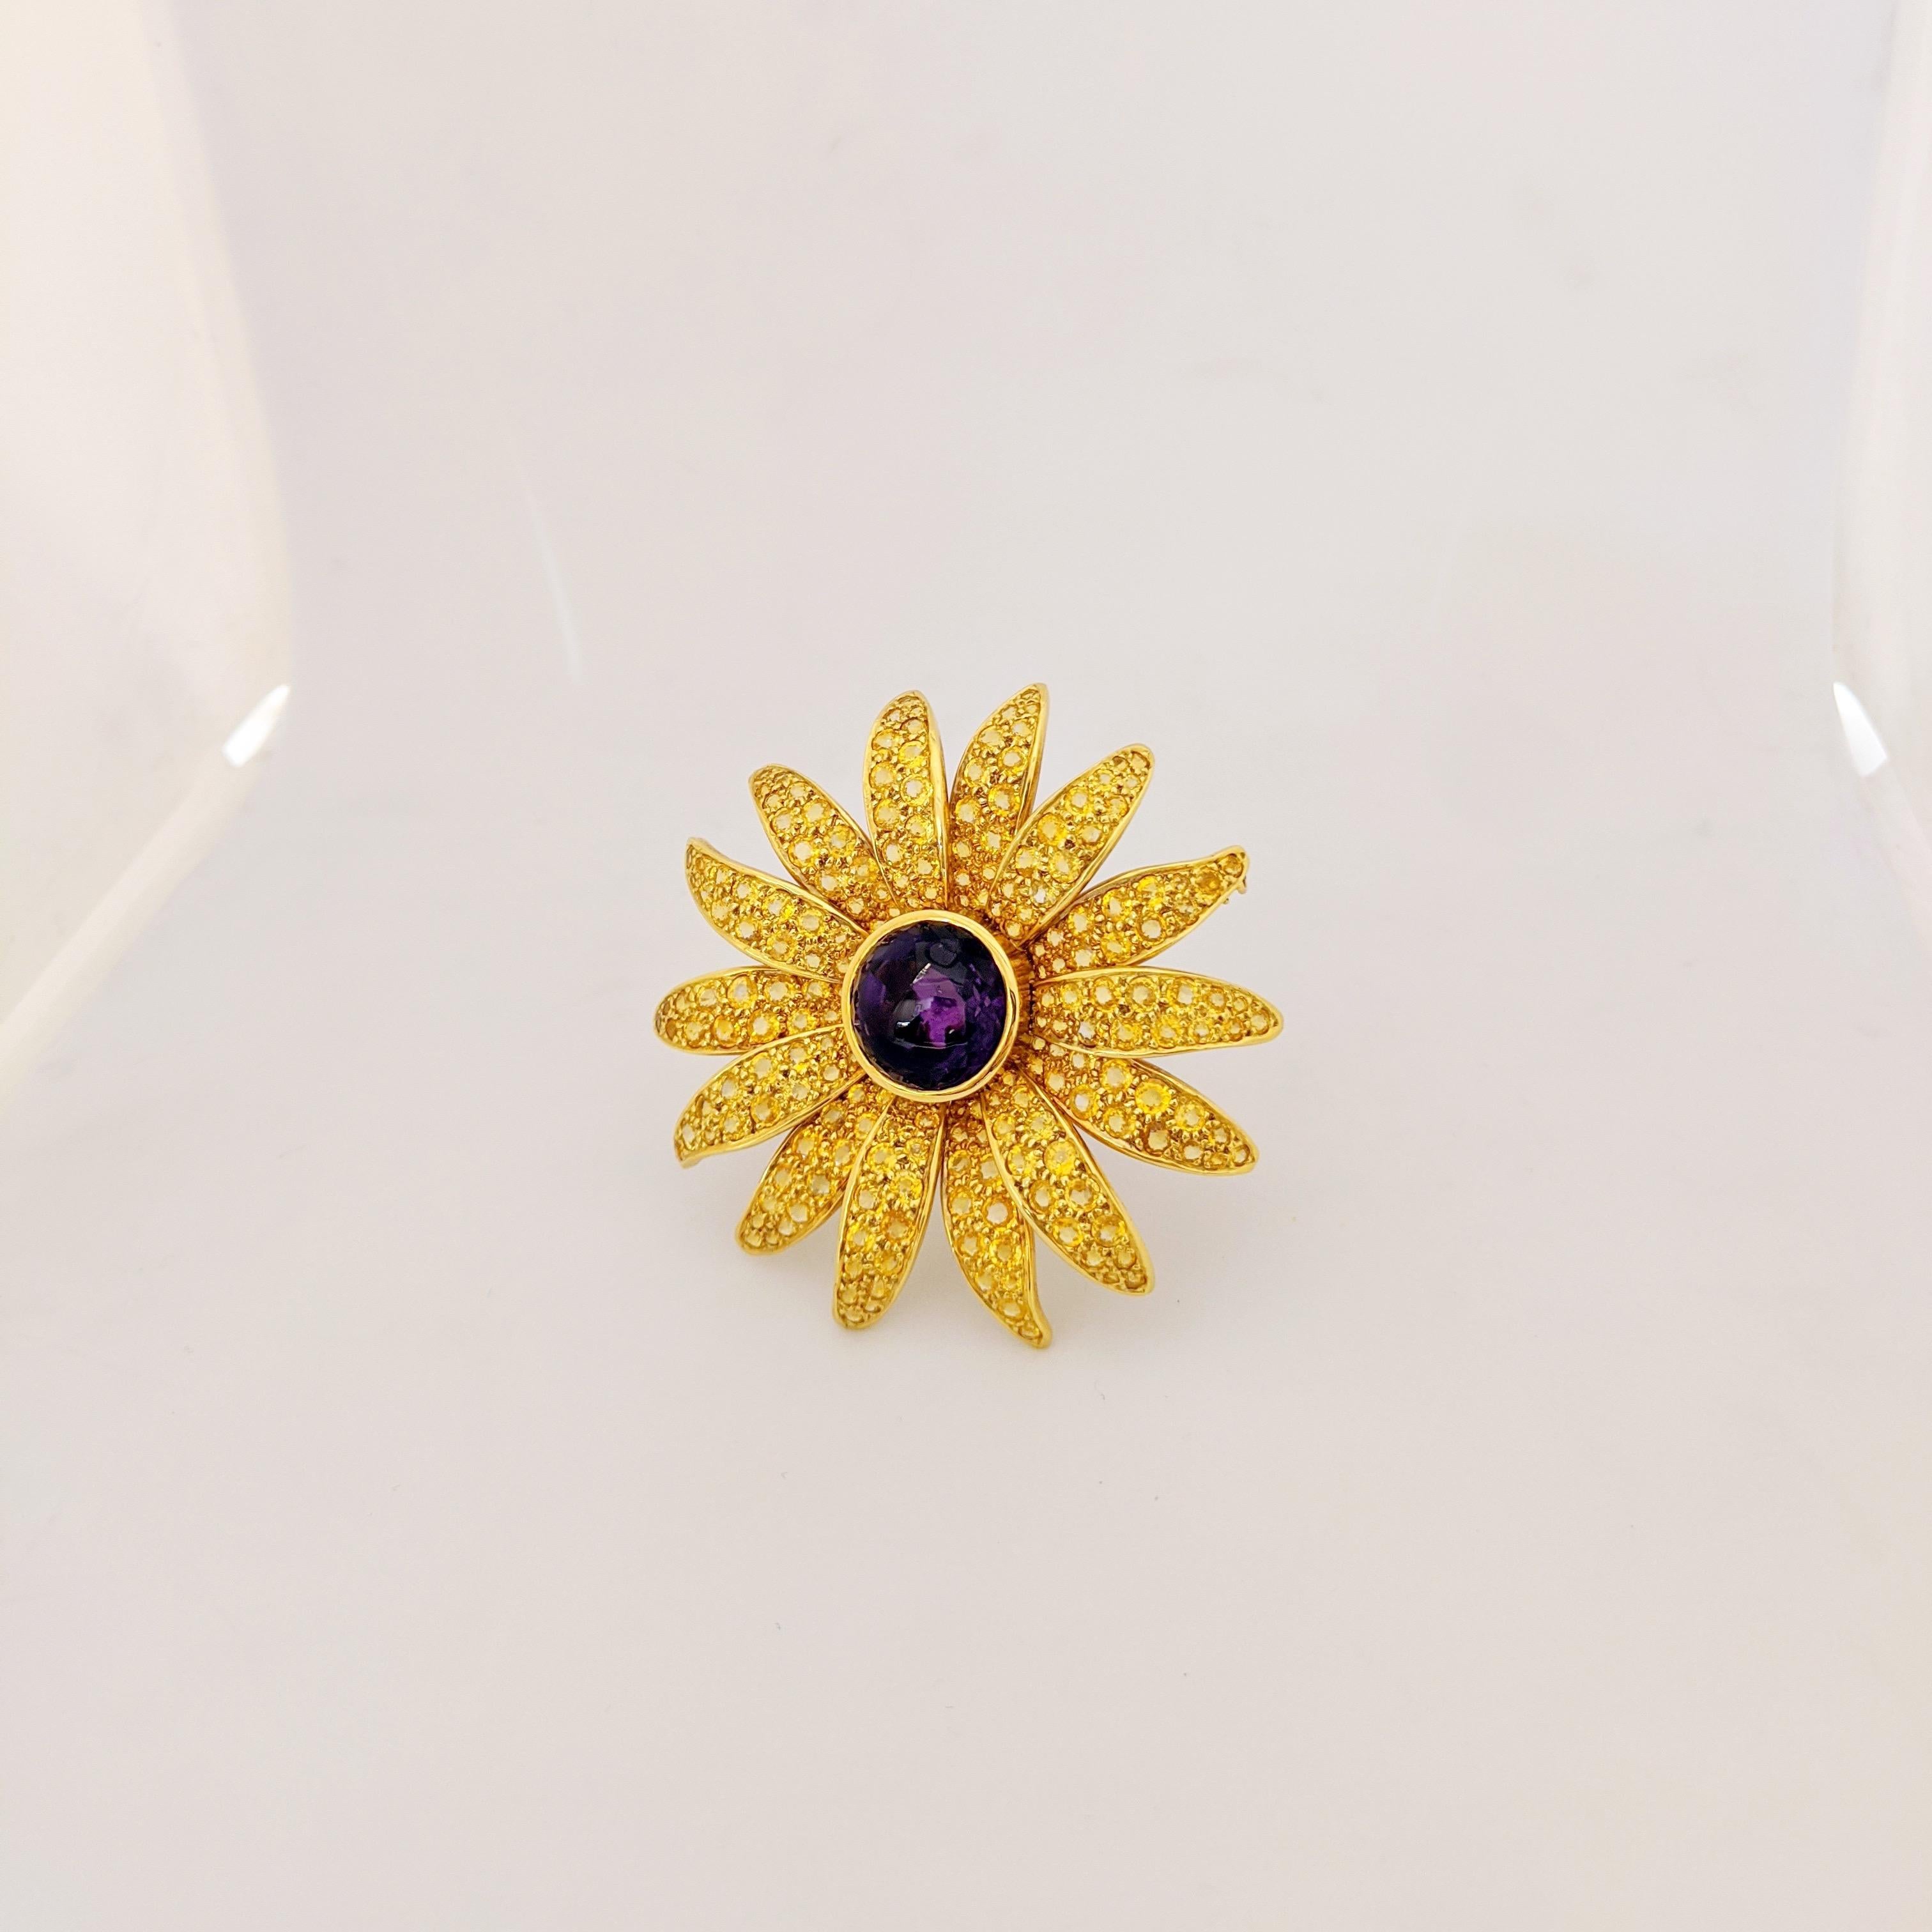 Hello Sunshine!!
18 karat yellow gold Sunflower brooch . Each of the 14 petals have been meticulously set with round brilliant cut Yellow Sapphires. The center of the flower is set with a cabachon Amethyst in a bezel setting. The brooch measures